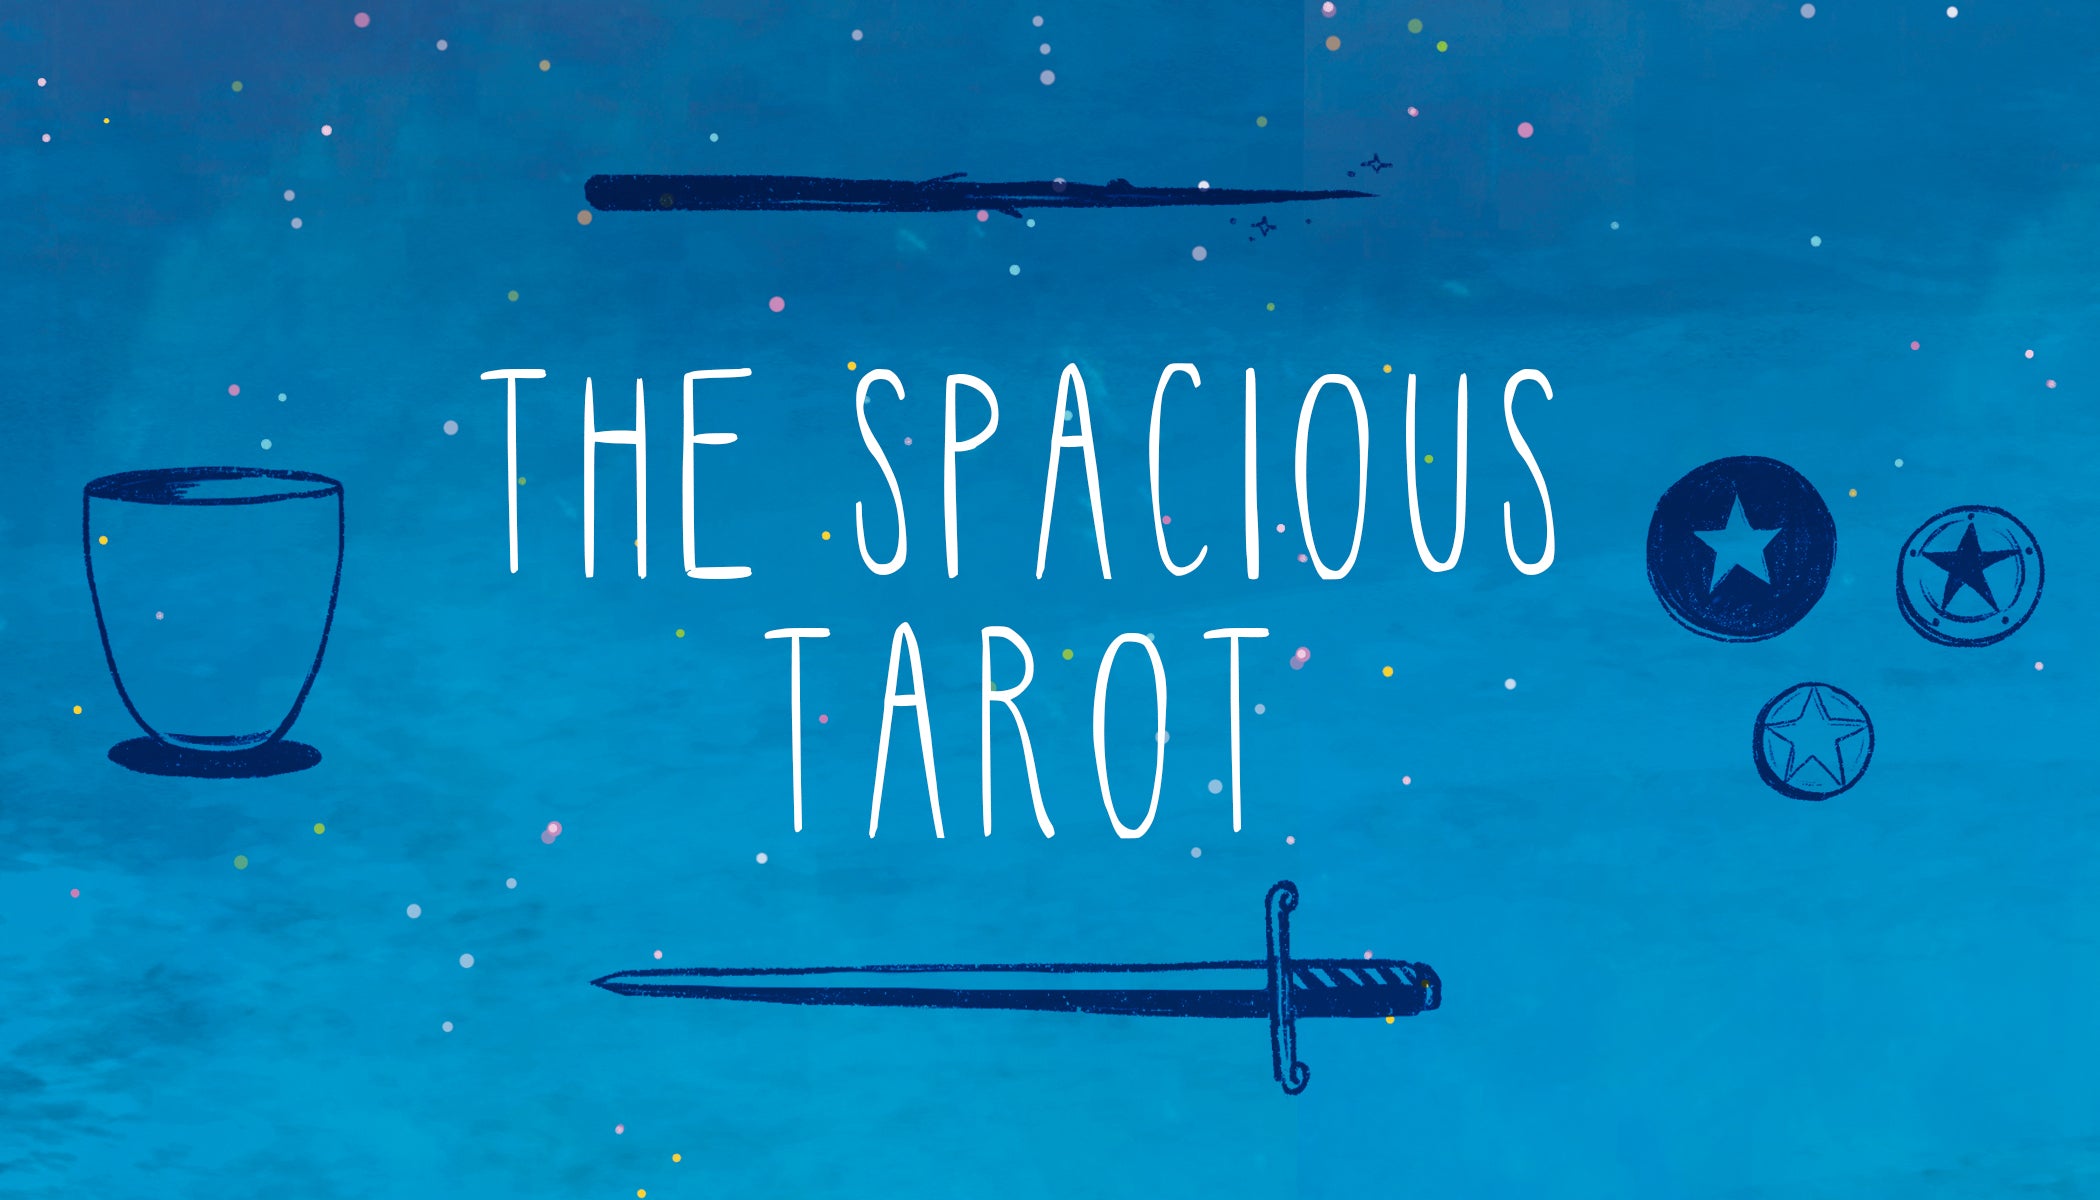 The Spacious Tarot. This Space is For You.